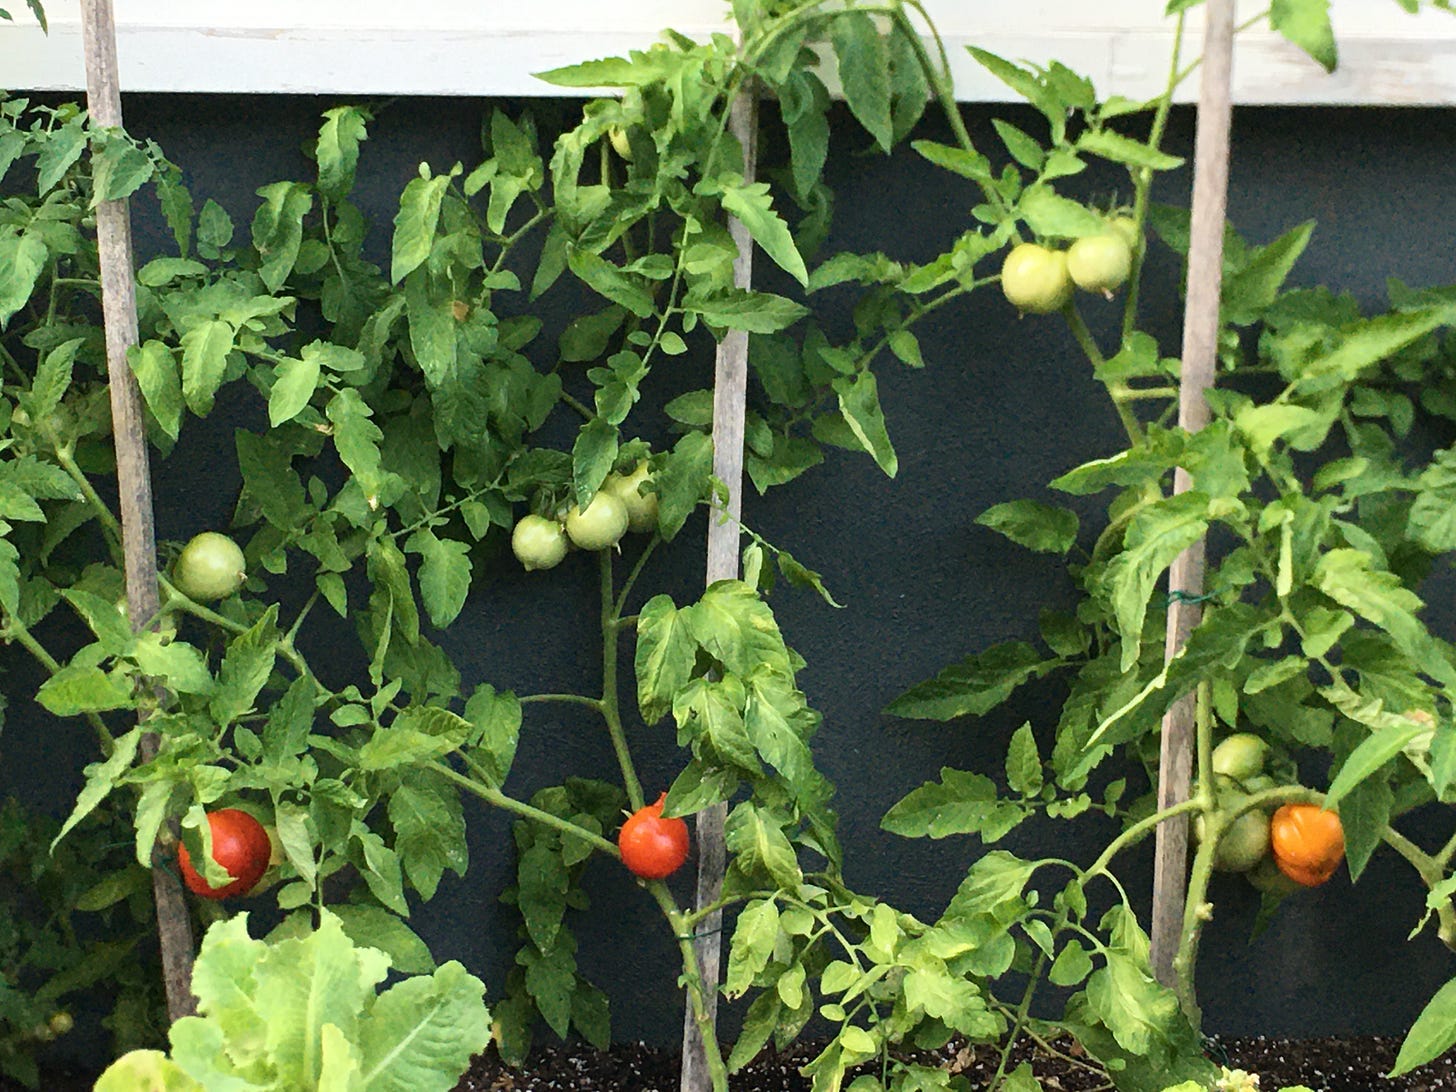 A single line of three tomato plants, ripe with green and red fruit, hugs the side of a house.